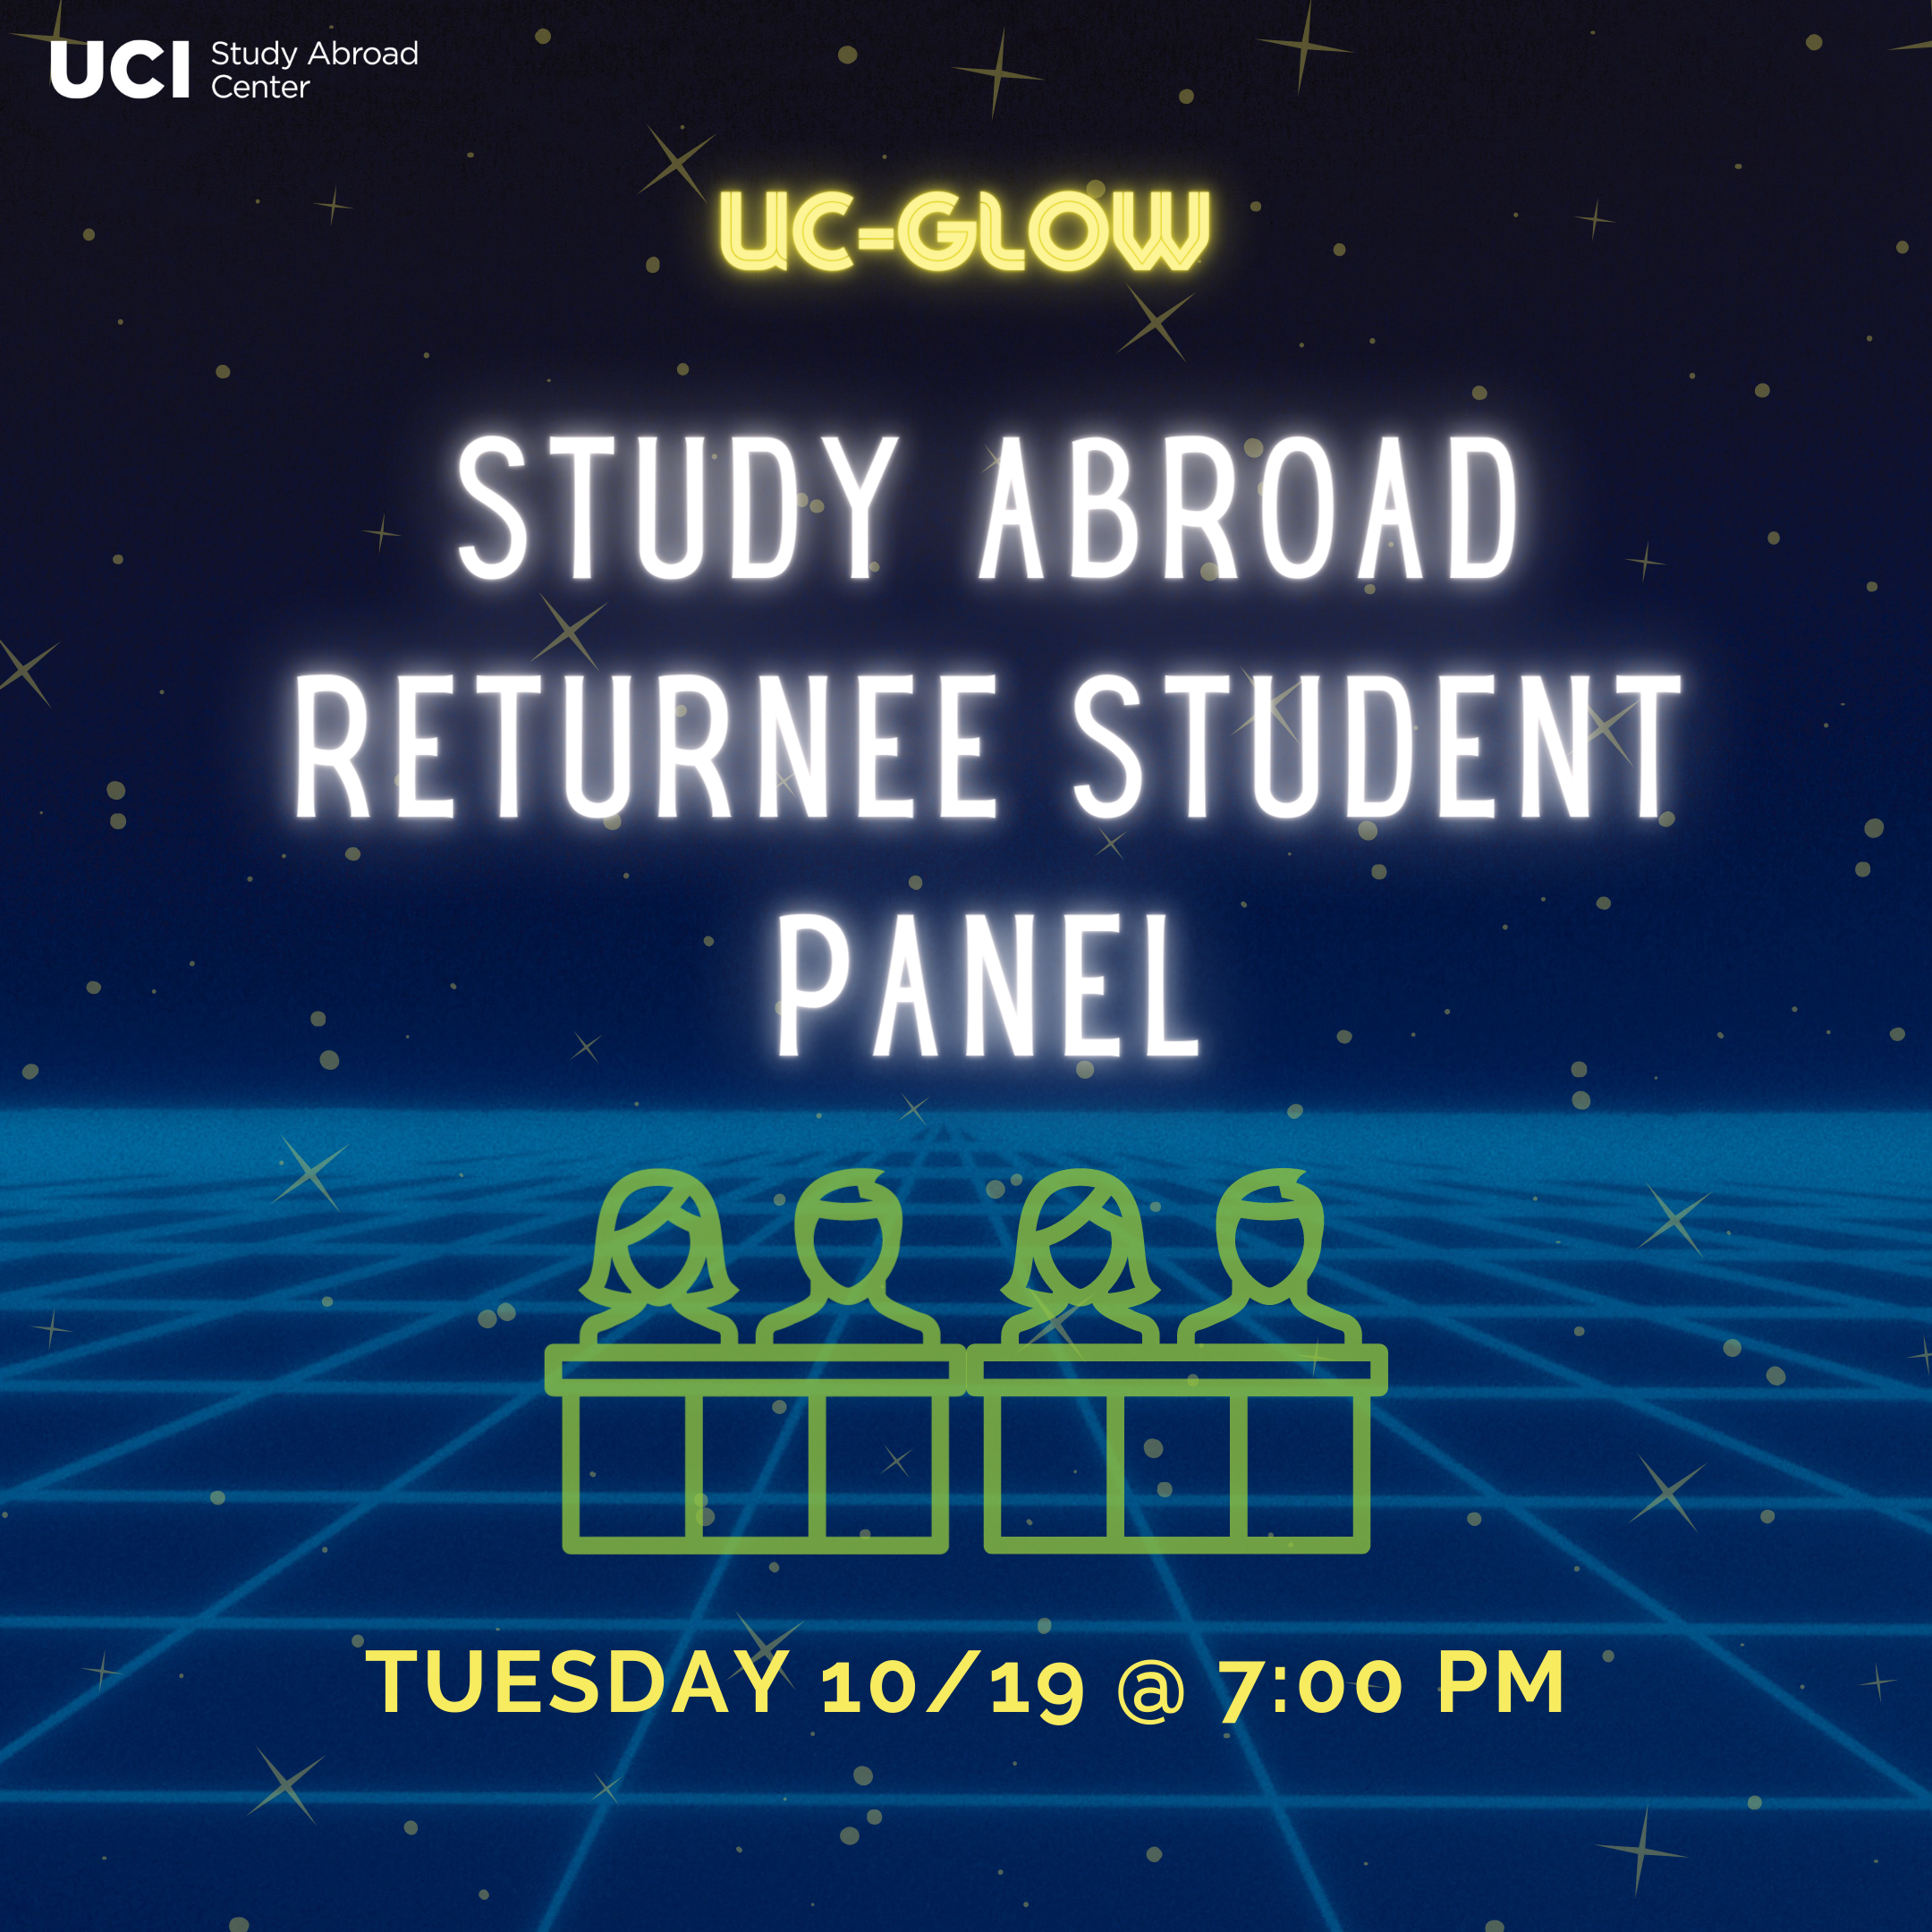 UC-GLOW. Study abroad returnee student panel. Tuesday October 19th at 7:00pm